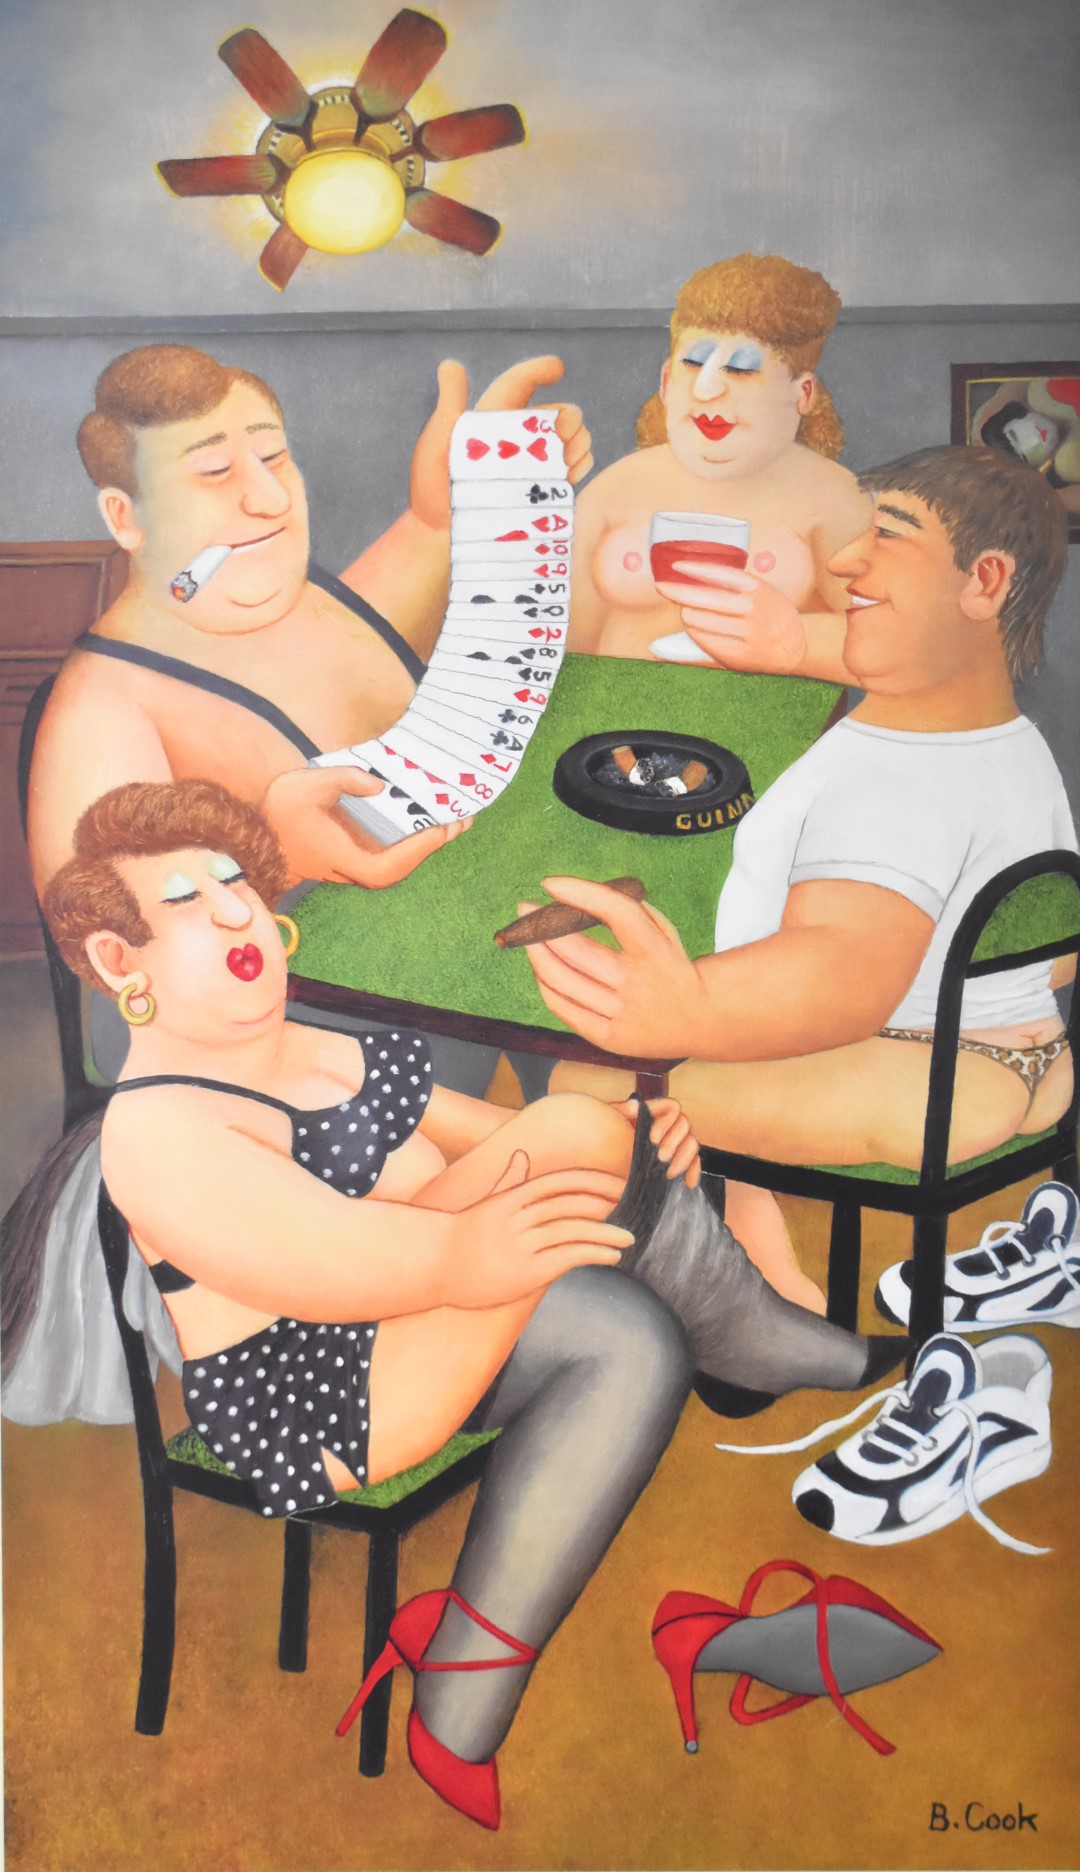 Beryl Cook (1928-2008) signed limited edition (90/650) print 'Strip Poker', with gallery blind stamp